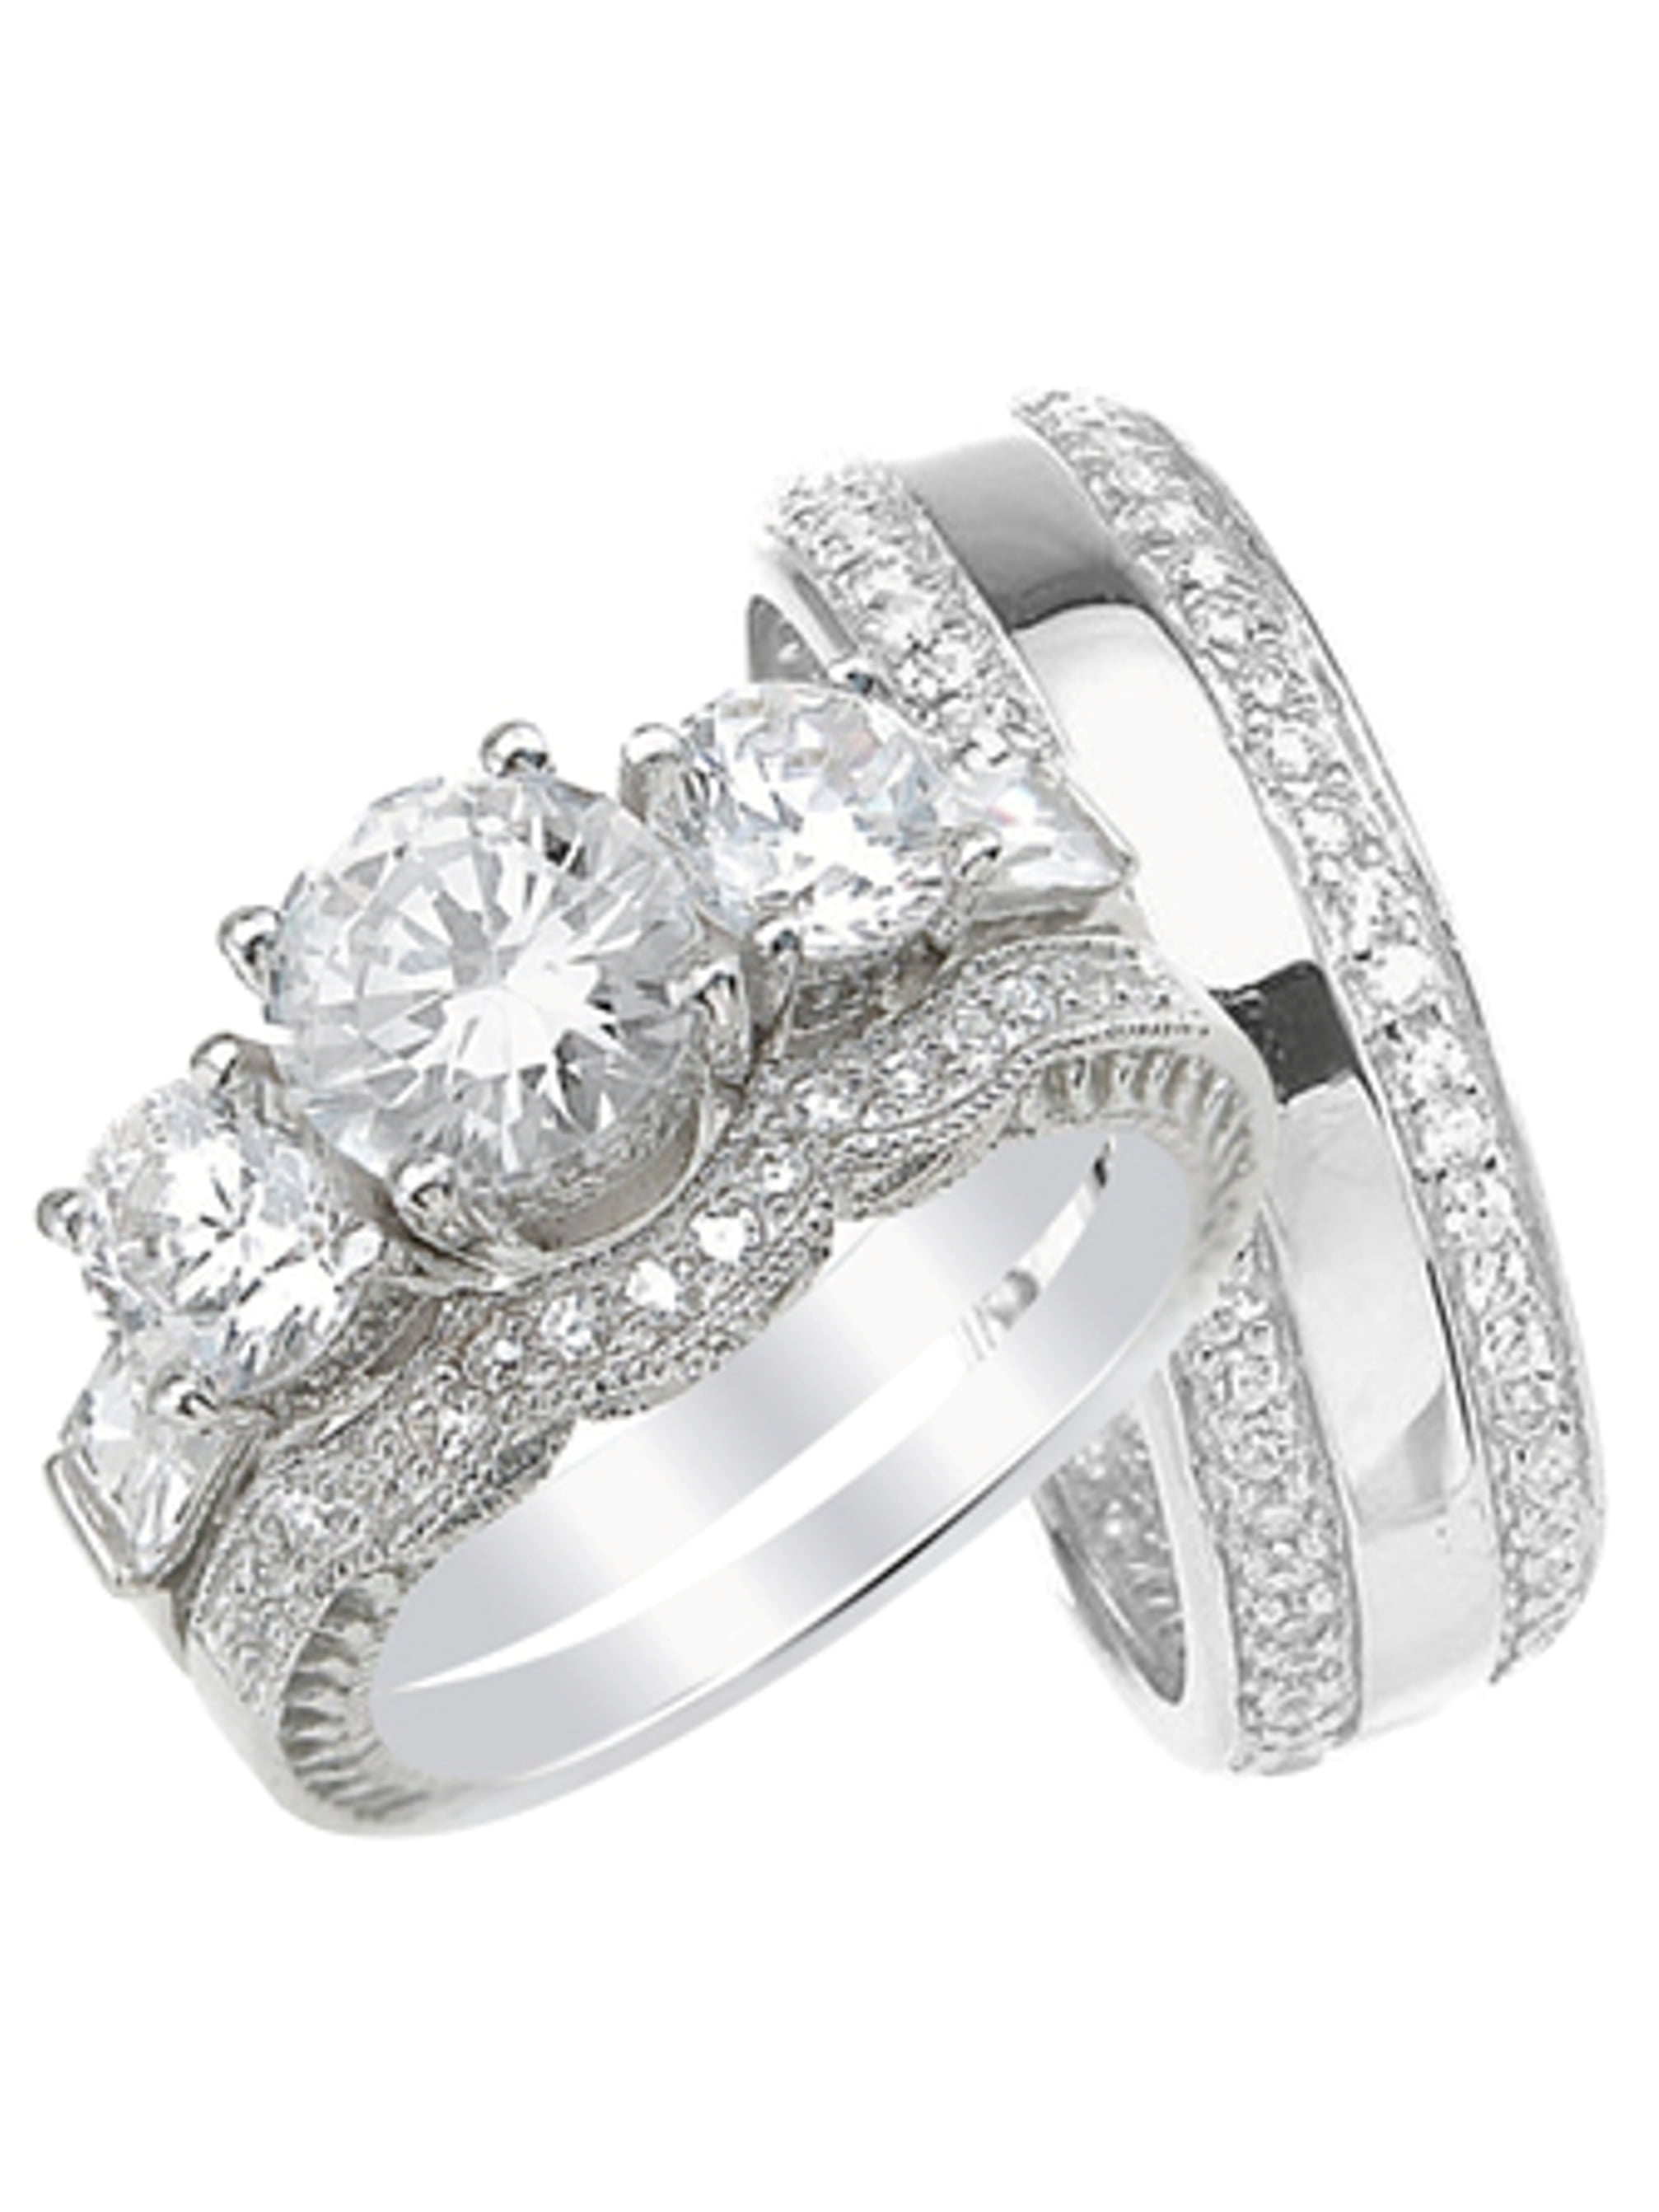 LaRaso & Co His and Hers High Quality CZ Wedding Ring Set Matching